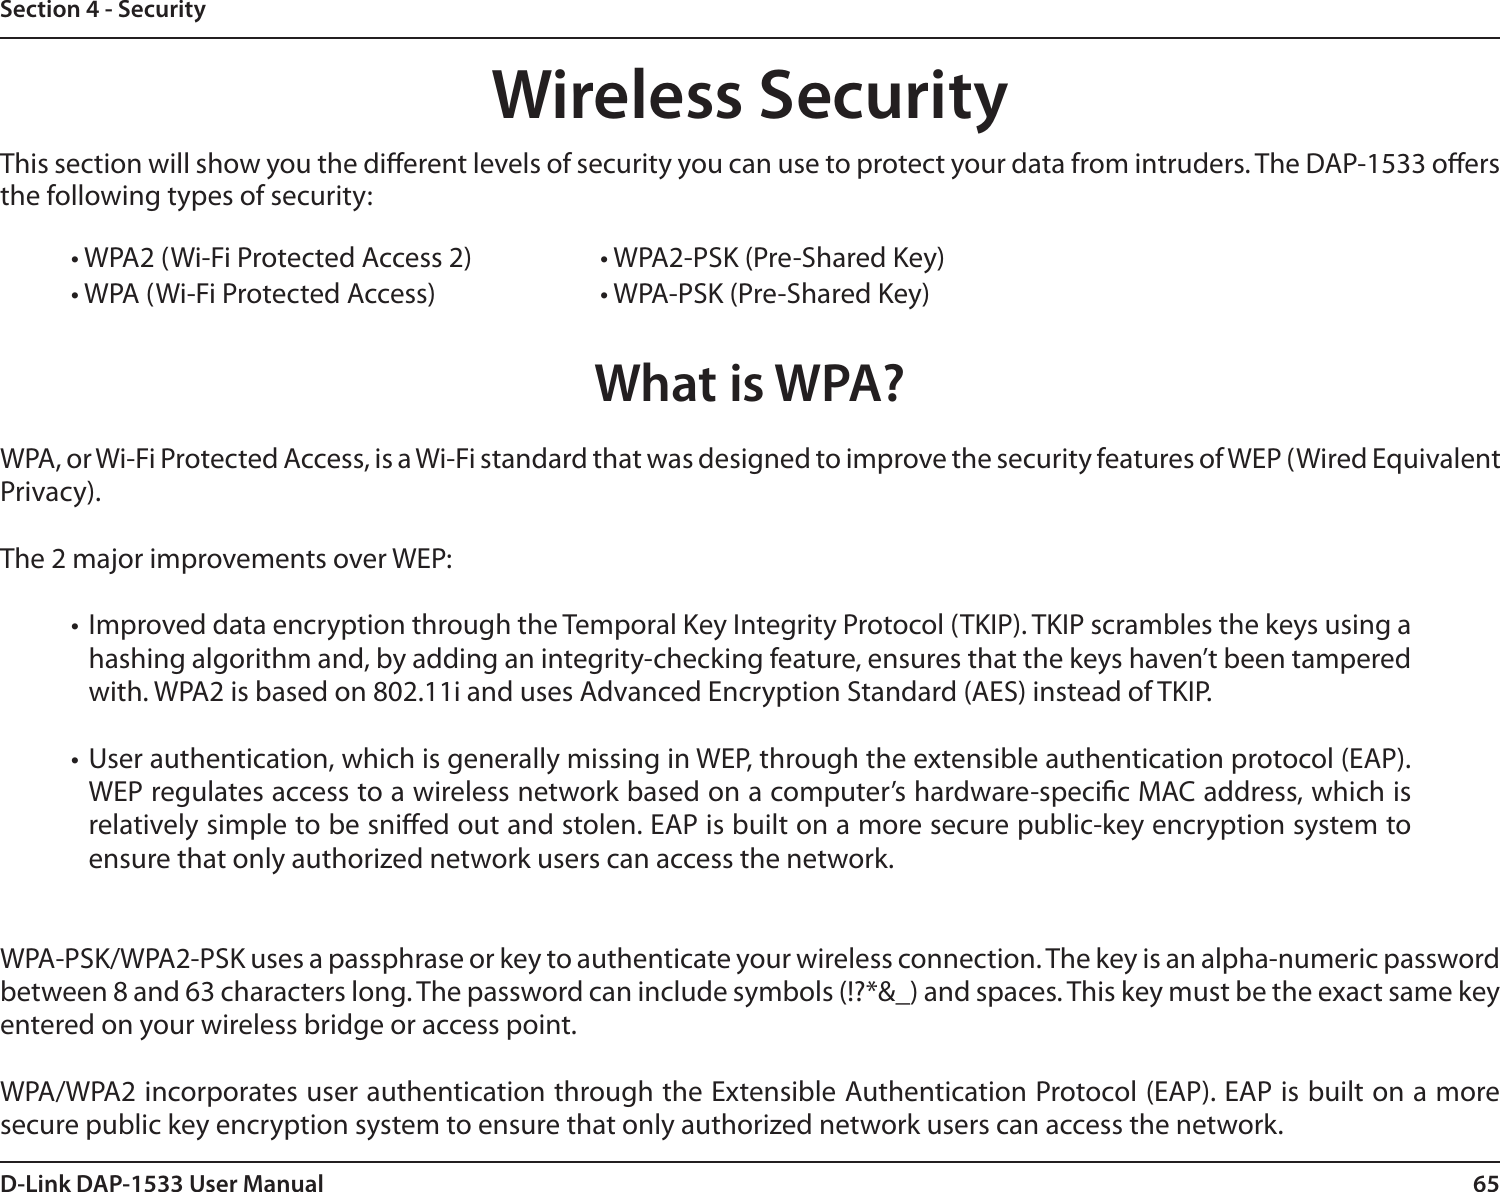 65D-Link DAP-1533 User ManualSection 4 - SecurityWireless SecurityThis section will show you the dierent levels of security you can use to protect your data from intruders. The DAP-1533 oers the following types of security:• WPA2 (Wi-Fi Protected Access 2)     • WPA2-PSK (Pre-Shared Key)• WPA (Wi-Fi Protected Access)      • WPA-PSK (Pre-Shared Key)What is WPA?WPA, or Wi-Fi Protected Access, is a Wi-Fi standard that was designed to improve the security features of WEP (Wired Equivalent Privacy).  The 2 major improvements over WEP: • Improved data encryption through the Temporal Key Integrity Protocol (TKIP). TKIP scrambles the keys using a hashing algorithm and, by adding an integrity-checking feature, ensures that the keys haven’t been tampered with. WPA2 is based on 802.11i and uses Advanced Encryption Standard (AES) instead of TKIP.• User authentication, which is generally missing in WEP, through the extensible authentication protocol (EAP). WEP regulates access to a wireless network based on a computer’s hardware-specic MAC address, which is relatively simple to be snied out and stolen. EAP is built on a more secure public-key encryption system to ensure that only authorized network users can access the network.WPA-PSK/WPA2-PSK uses a passphrase or key to authenticate your wireless connection. The key is an alpha-numeric password between 8 and 63 characters long. The password can include symbols (!?*&amp;_) and spaces. This key must be the exact same key entered on your wireless bridge or access point.WPA/WPA2 incorporates user authentication through the Extensible Authentication Protocol (EAP). EAP is built on a more secure public key encryption system to ensure that only authorized network users can access the network.